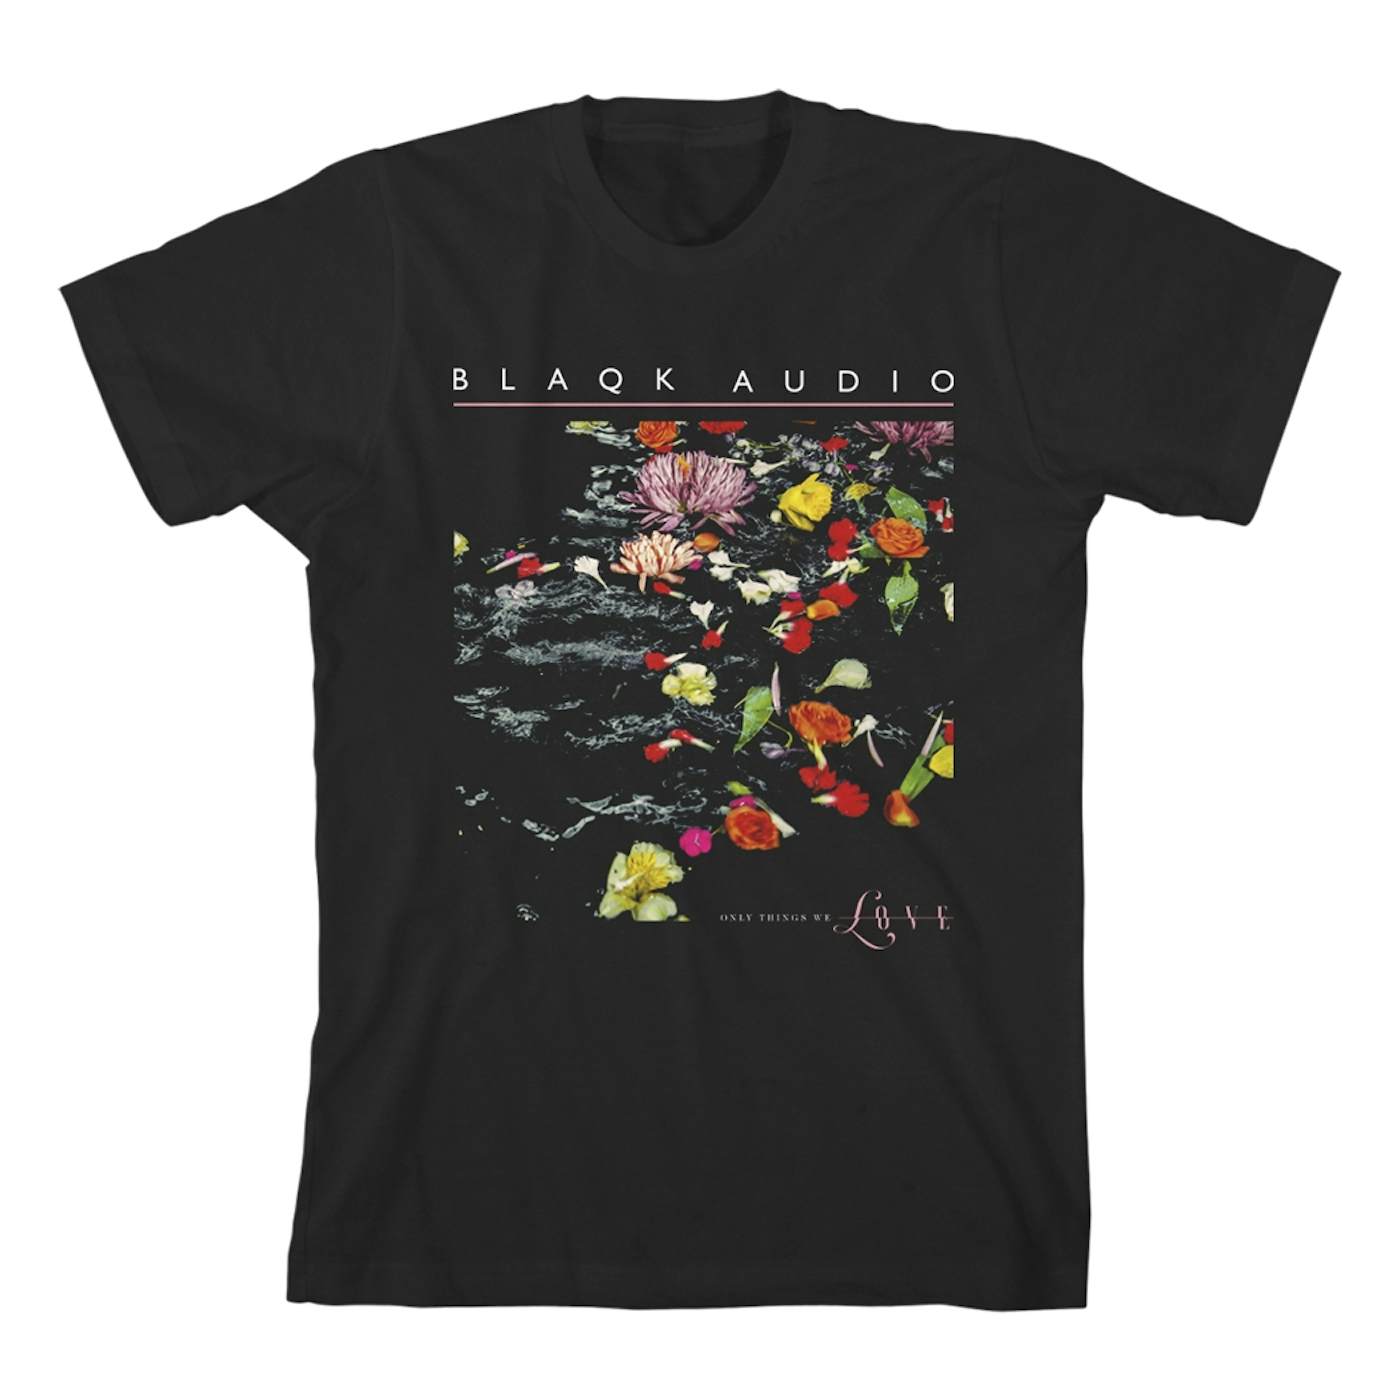 Blaqk Audio Only Things We Love Cover T-Shirt